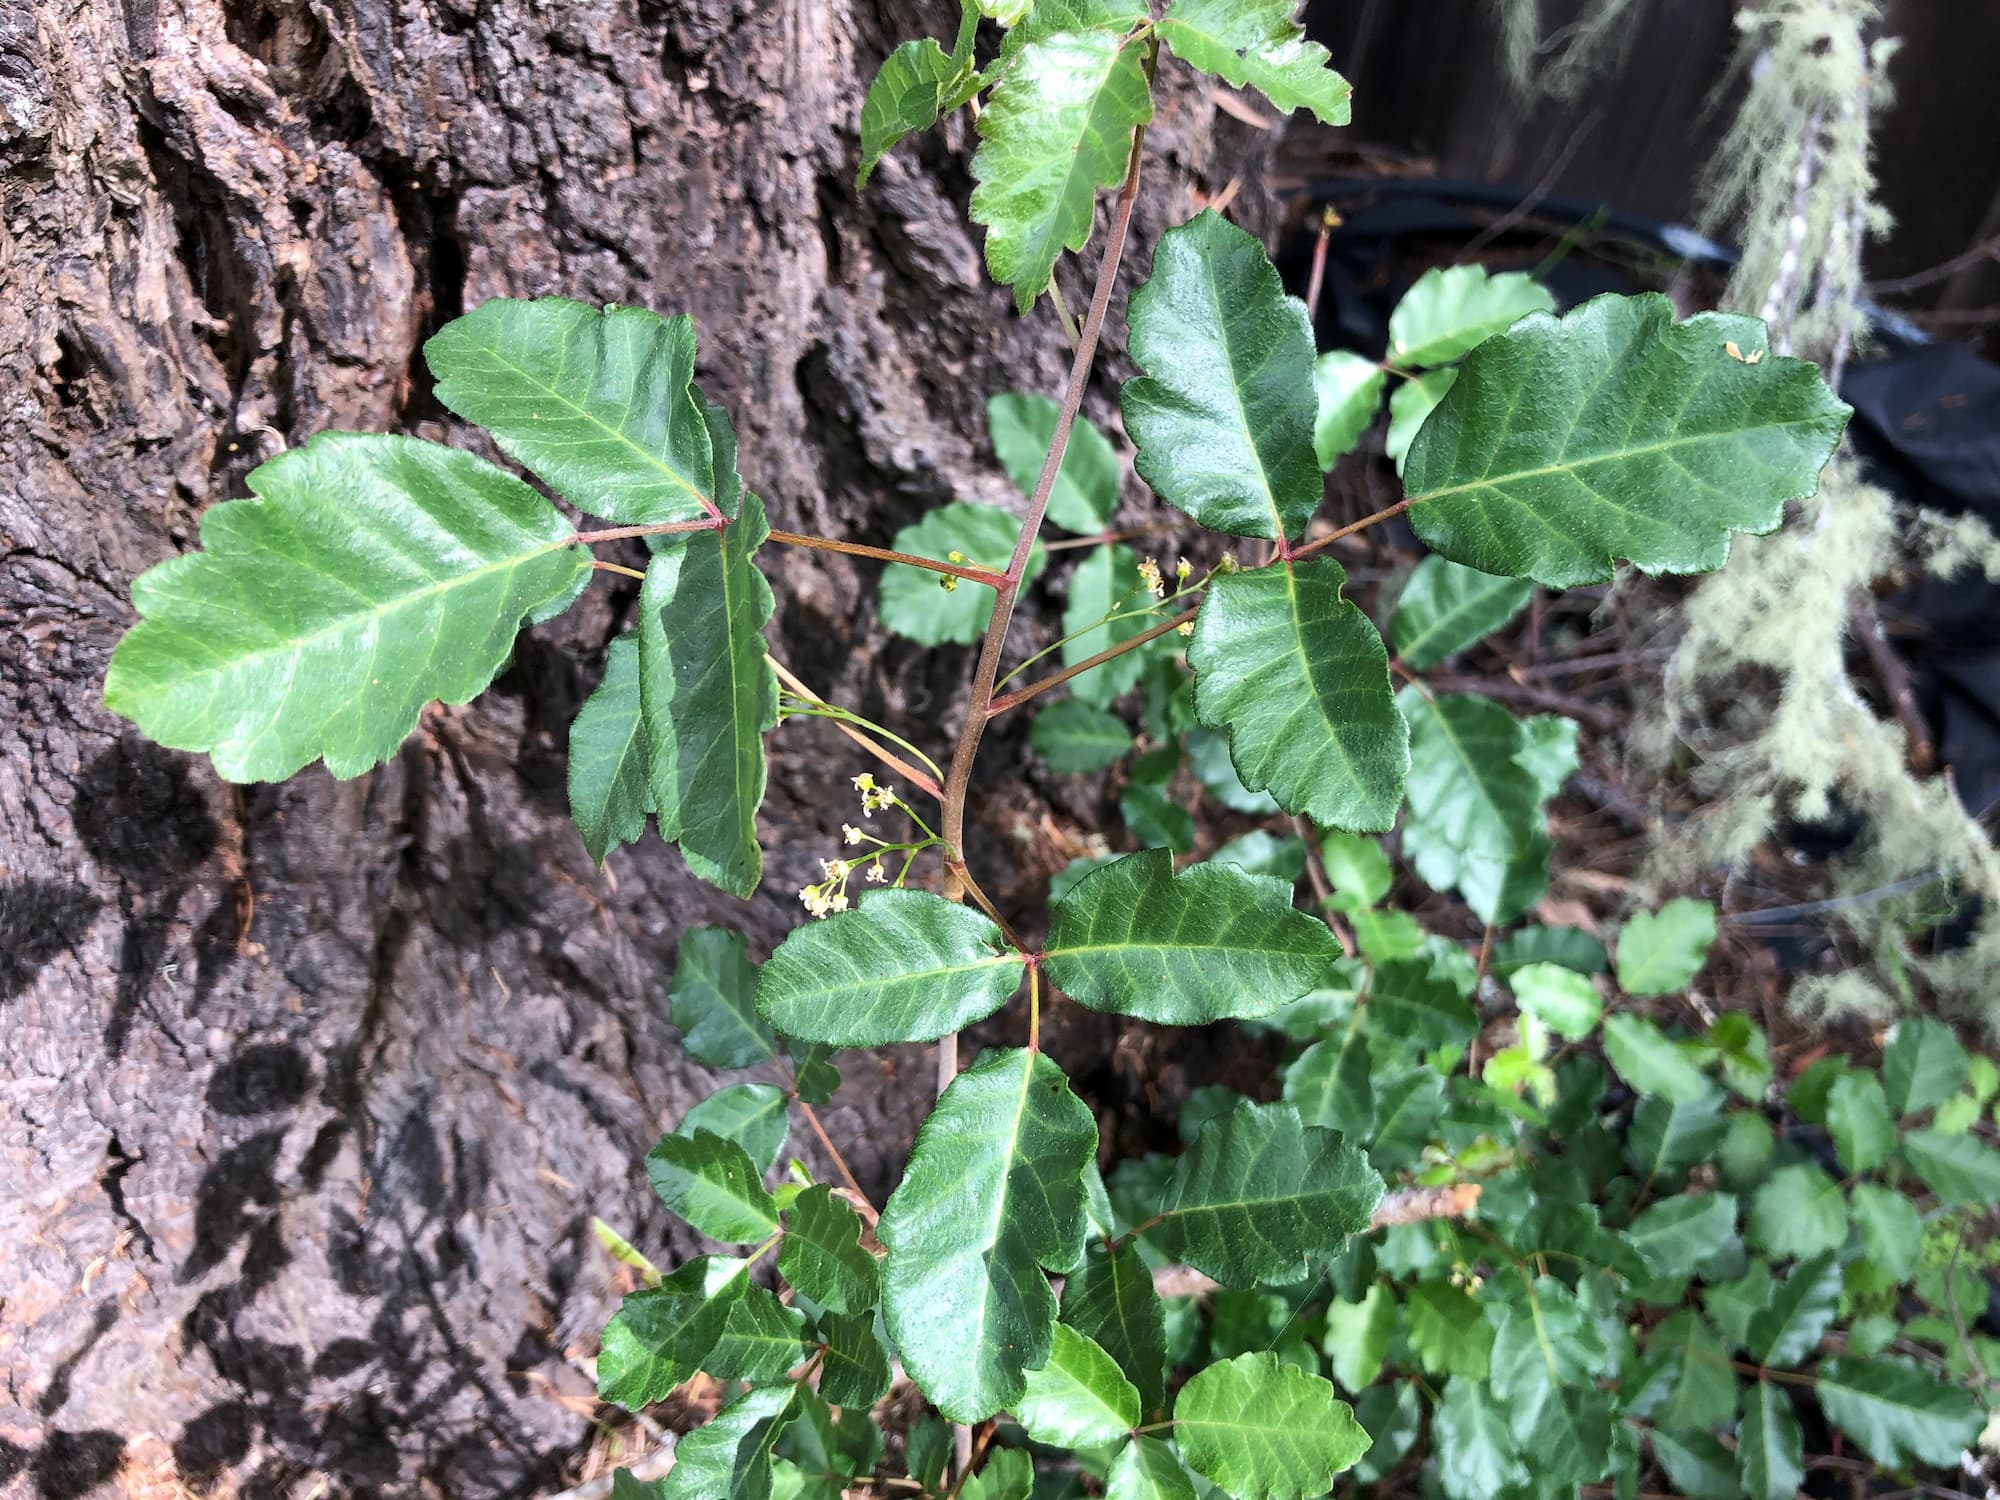 Poison oak leaves may appear superficially similar to those of the Rubus genus, but a closer look at the rest of the plant makes it obvious that it should be avoided.